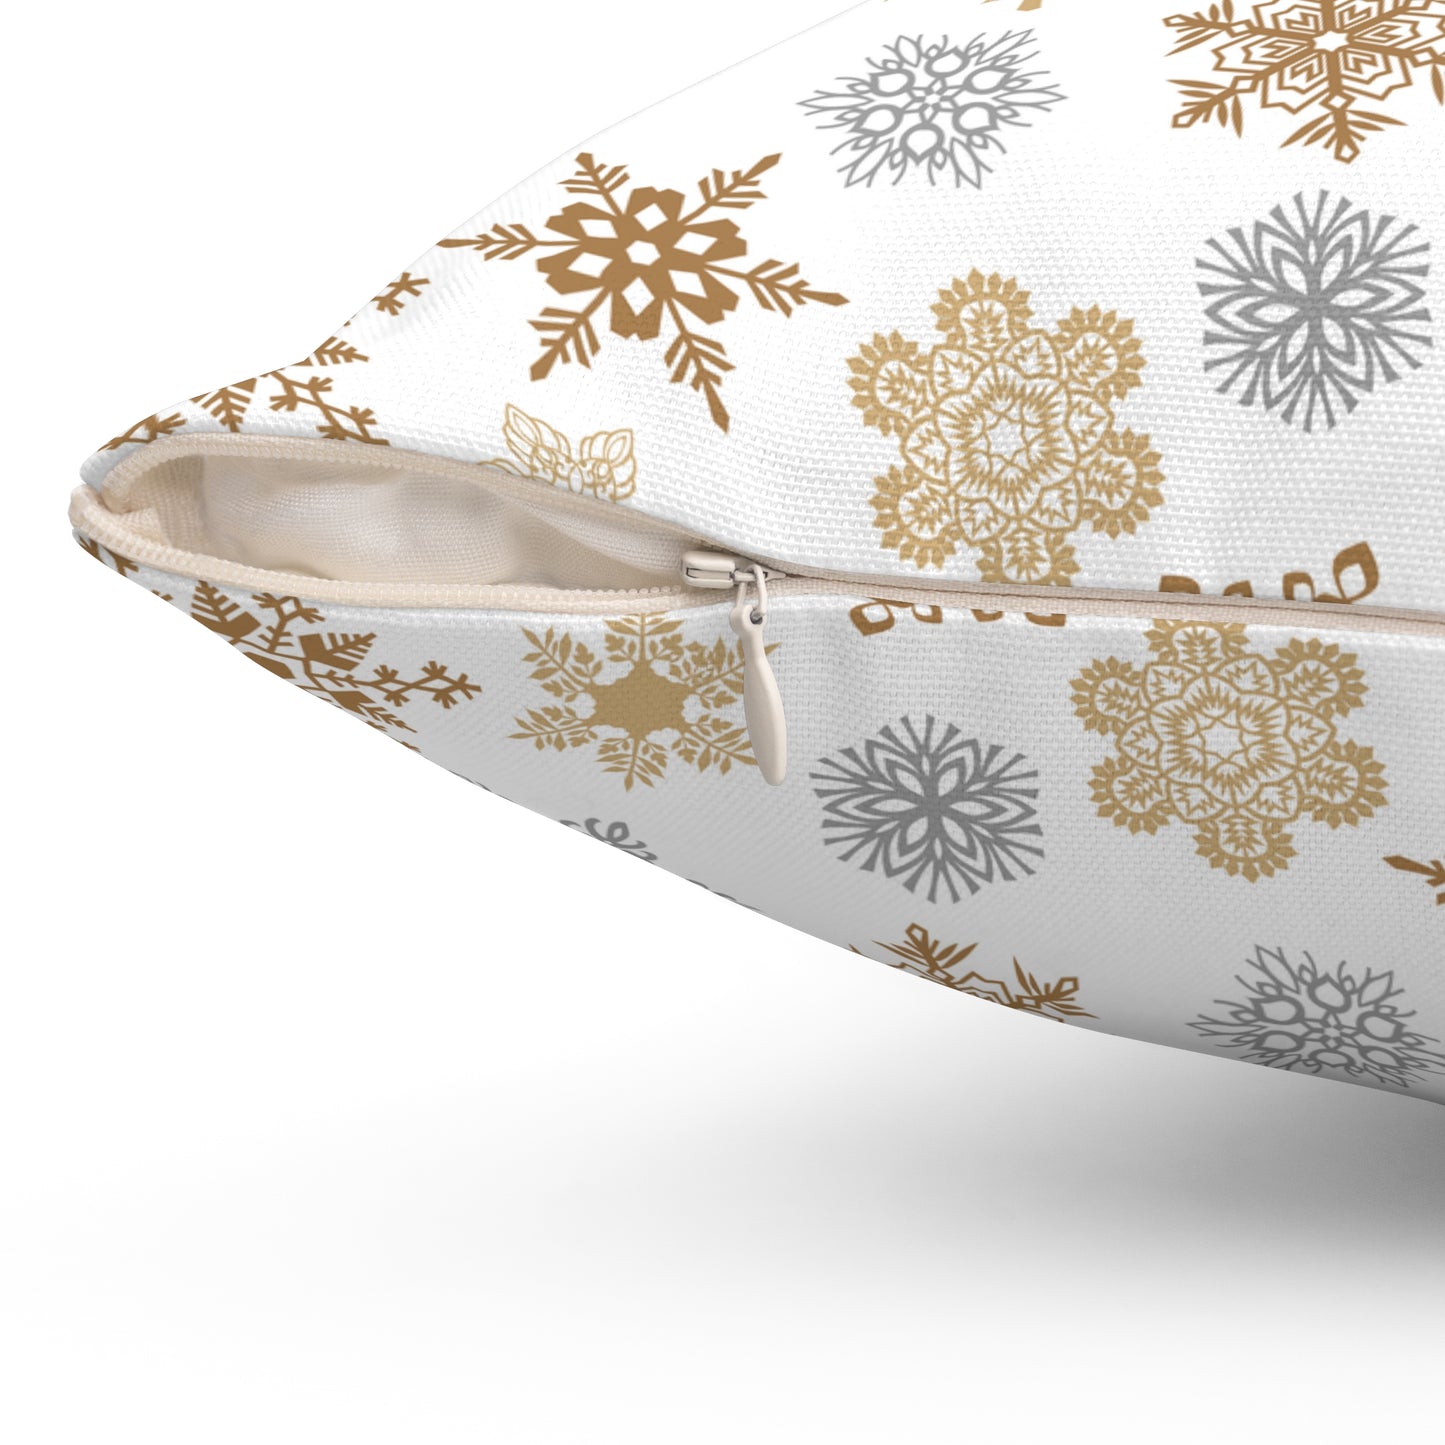 Gold and Silver Snowflakes Spun Polyester Square Pillow